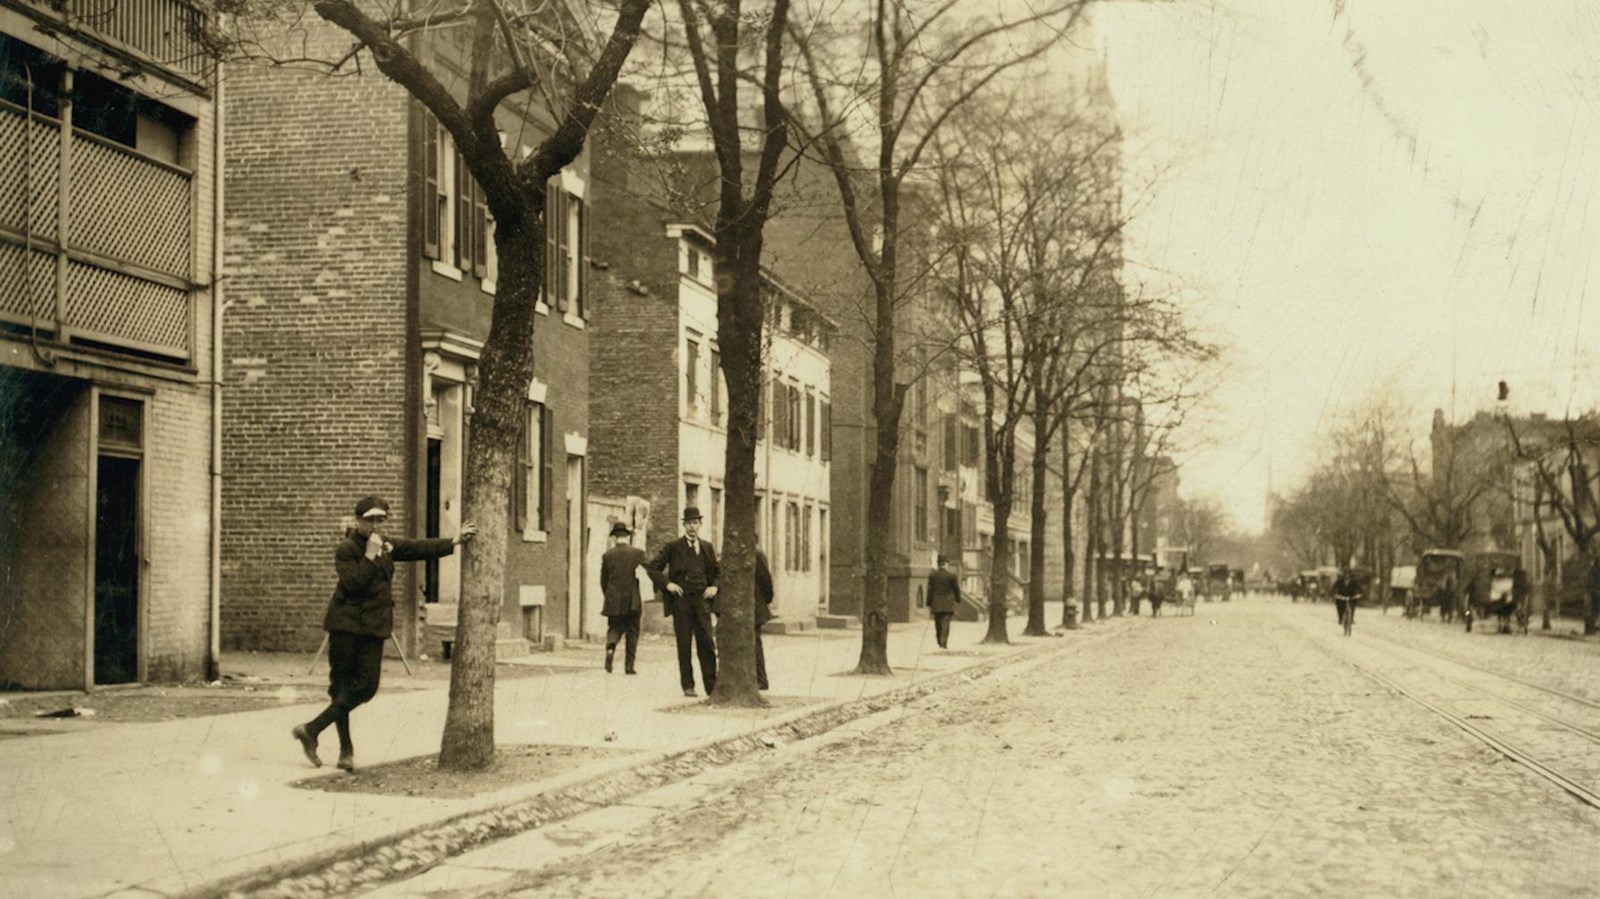 Men dressed in early twentieth century suits stand on a dirt street.